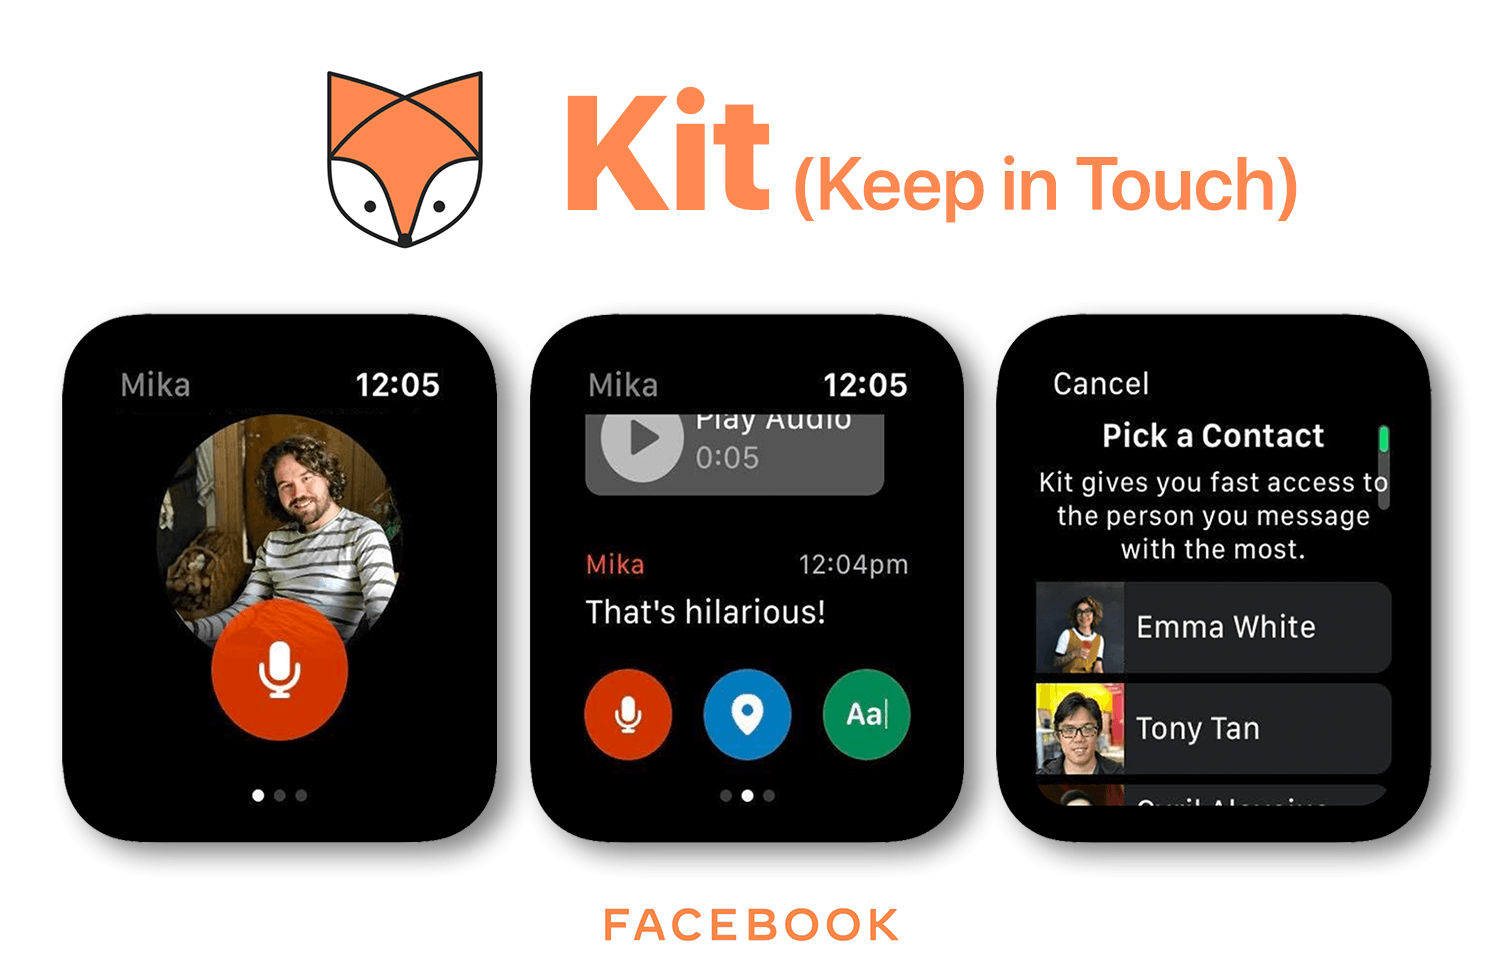 Kit (keep in touch) - experimental facebook messenger for Apple Watch